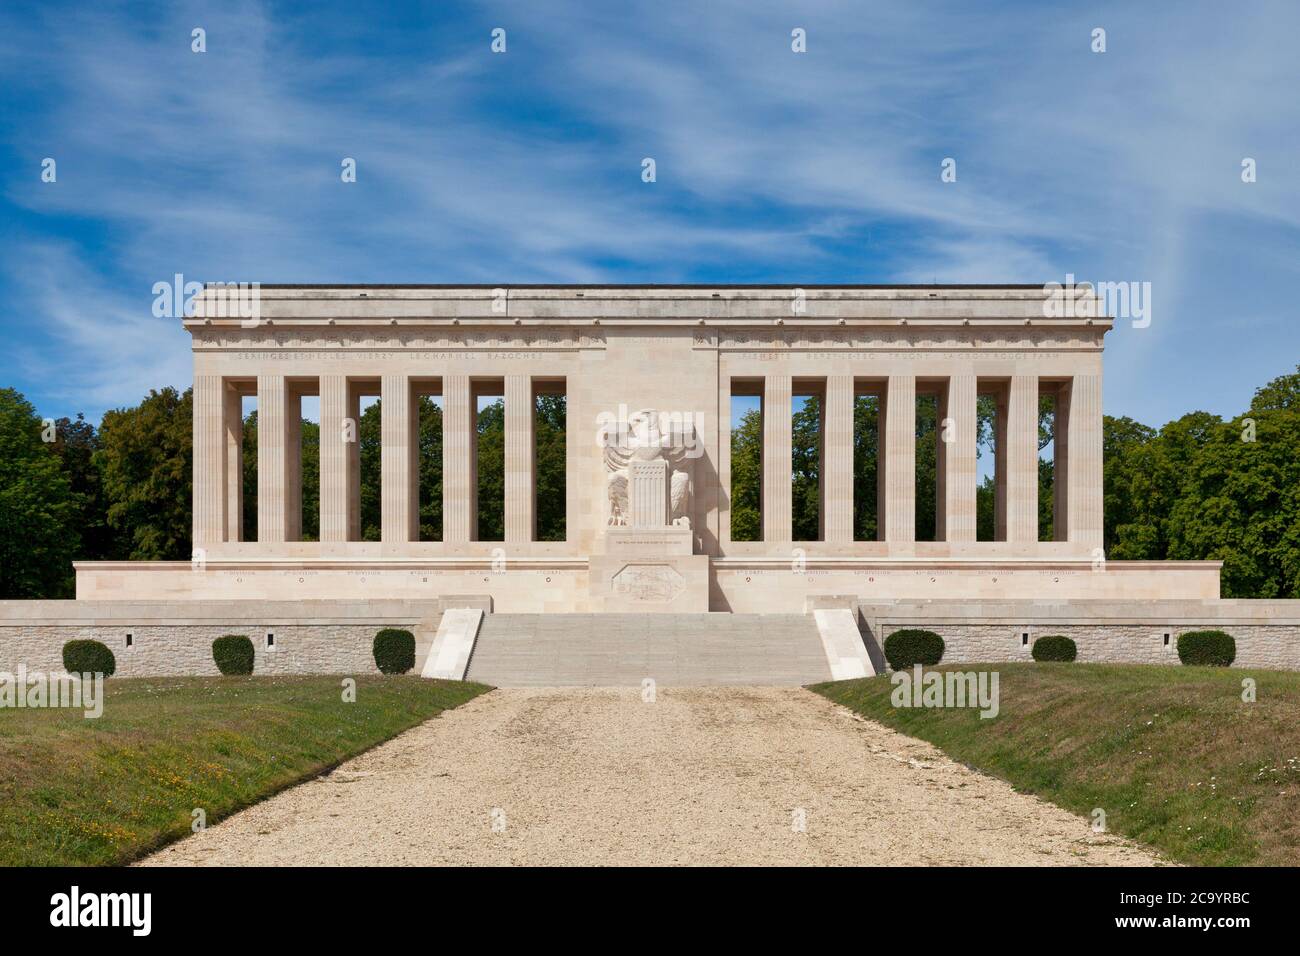 Château-Thierry, France - July 23 2020: The Château-Thierry American Monument is a World War I memorial located near Château-Thierry, Aisne, France. Stock Photo